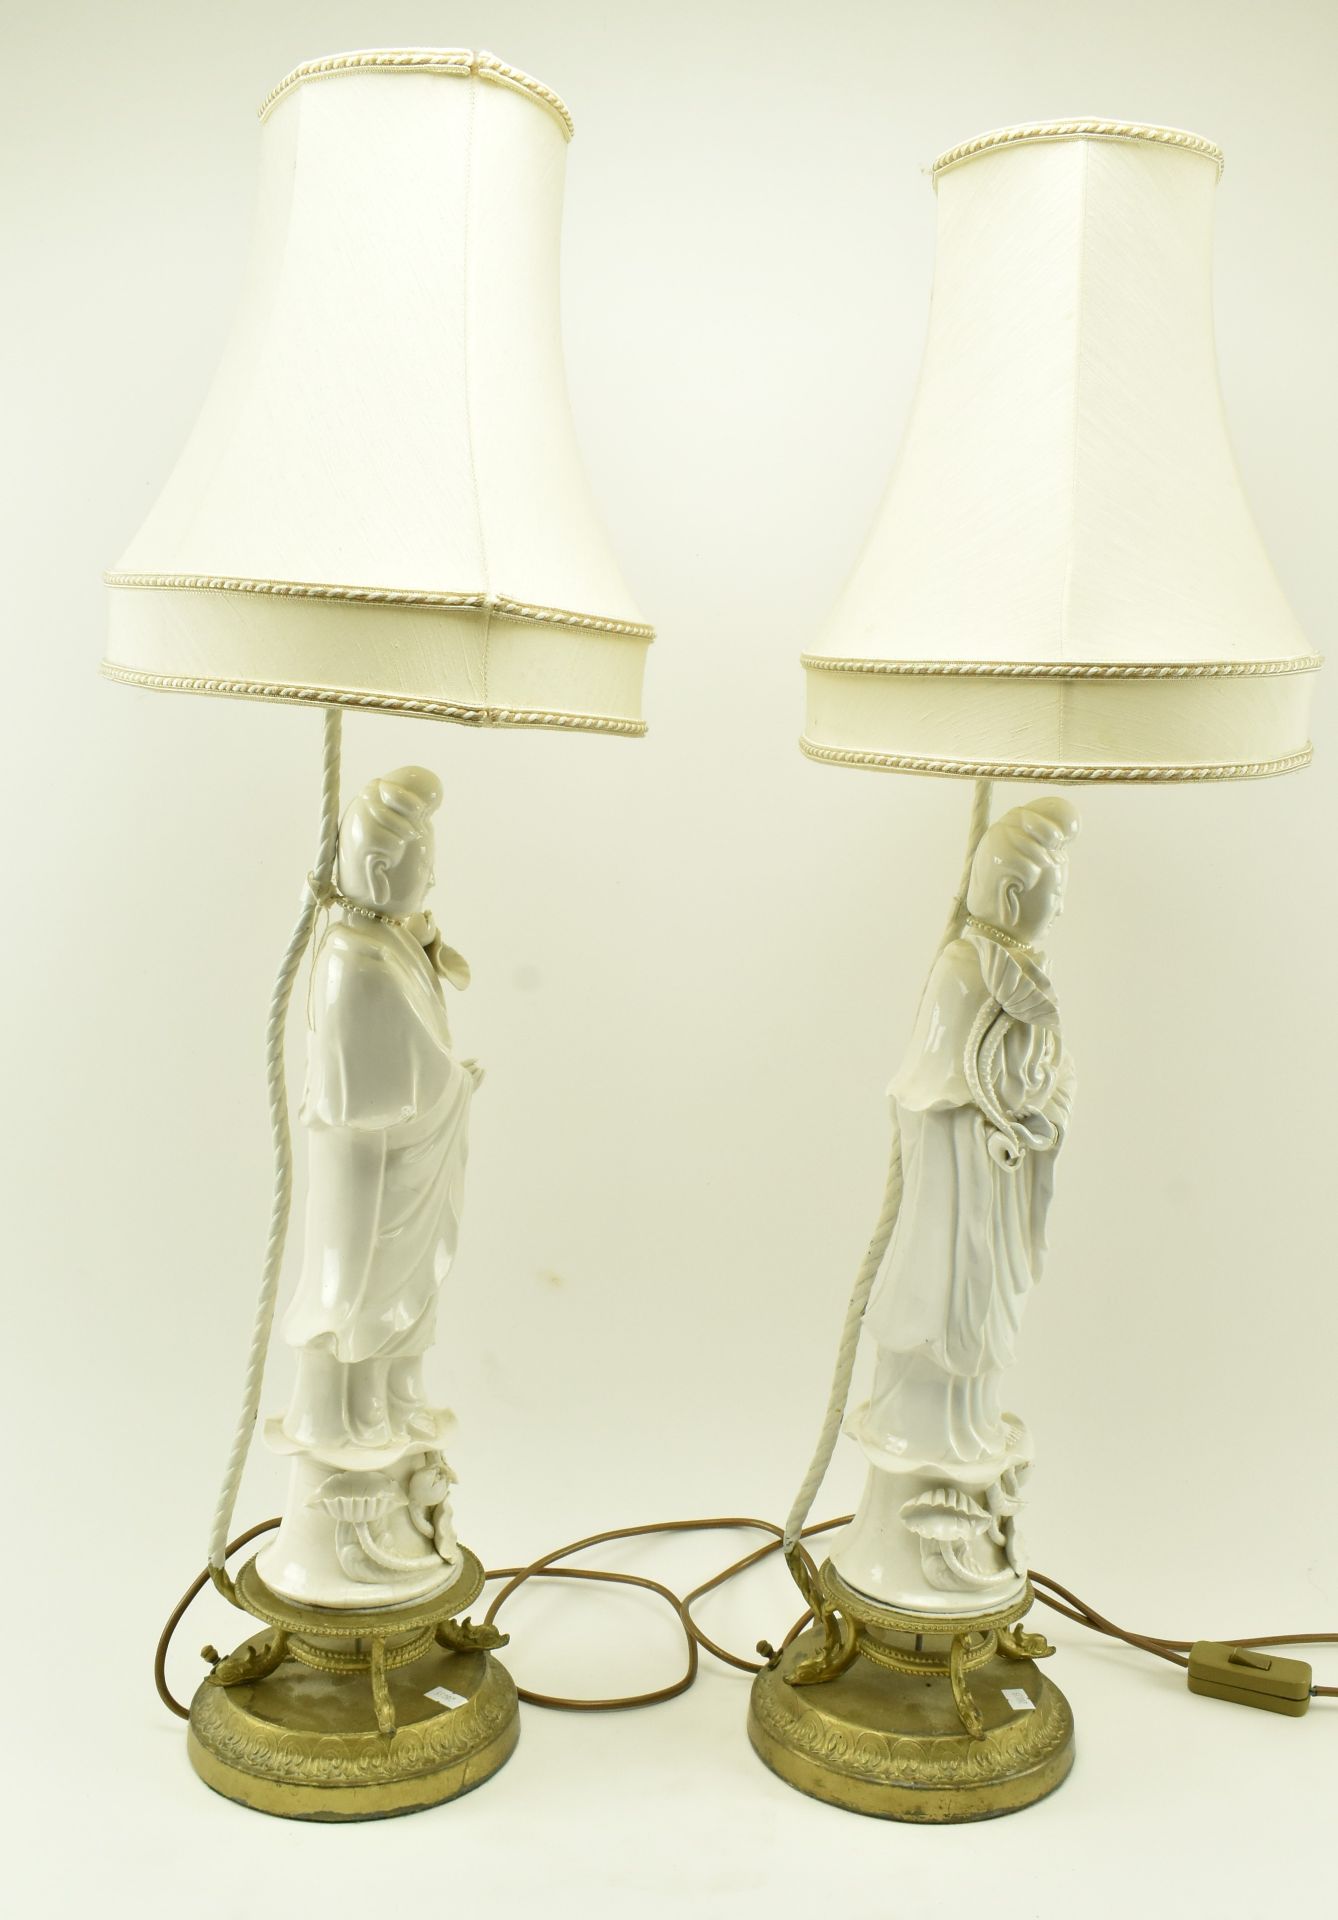 PAIR OF CHINESE REPUBLIC PERIOD BLANC DE CHINE GUANYIN LAMPS - Image 6 of 9